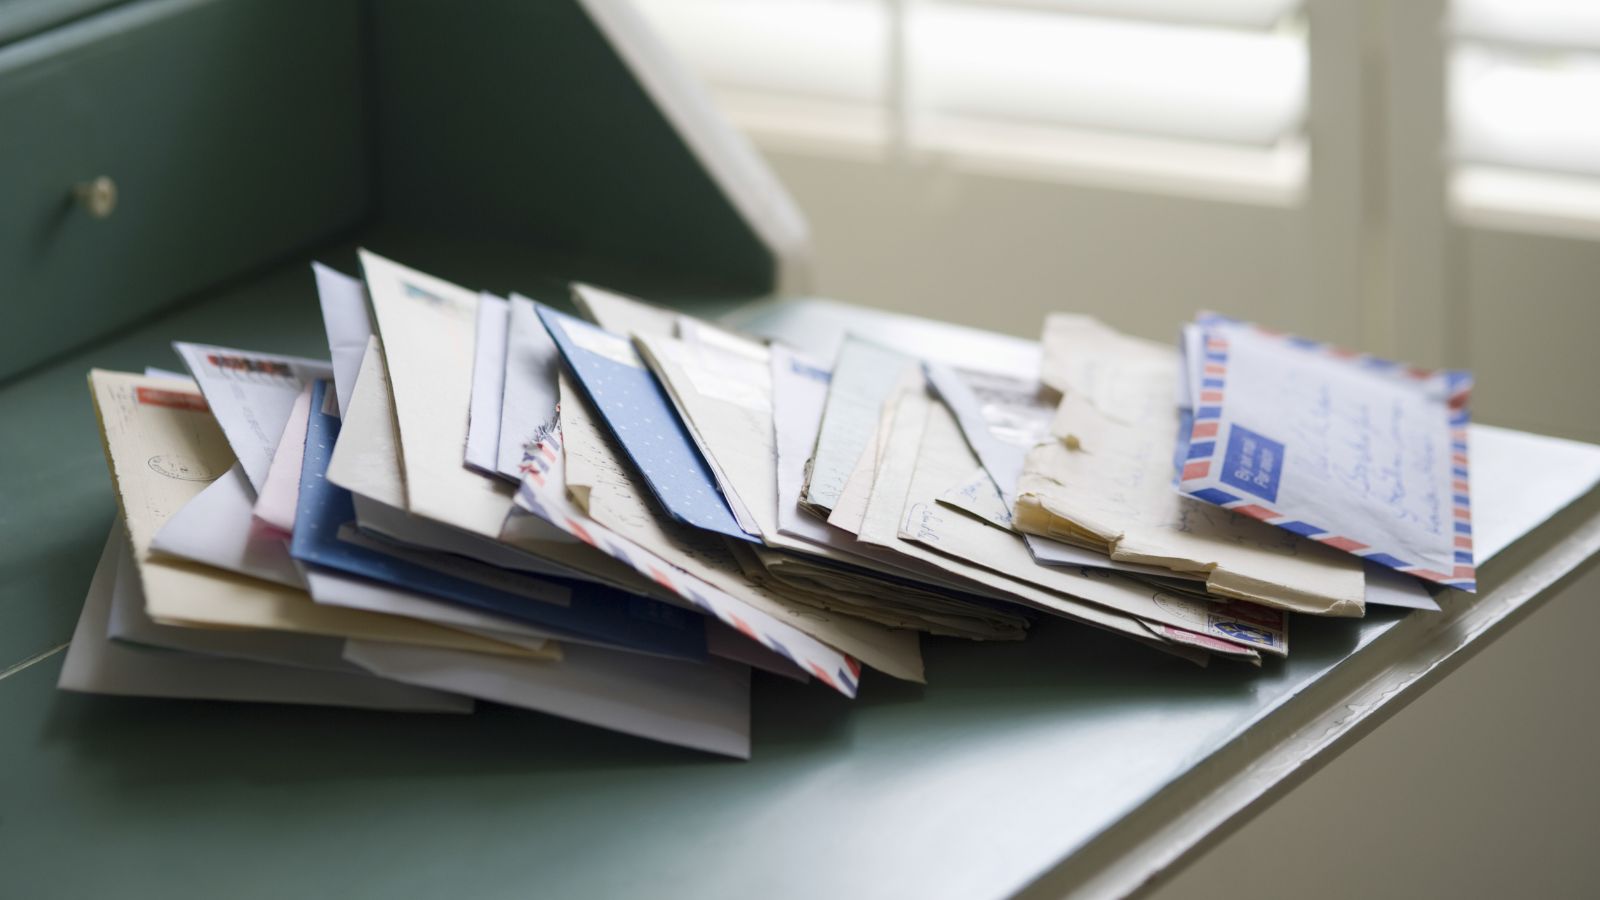 <p>It may be tempting to store documents and mail on the countertop, but they will be at risk of spills and stains and will make the surface look cluttered and disorganized. They are better stored in another room where they are less likely to be lost or damaged.</p>